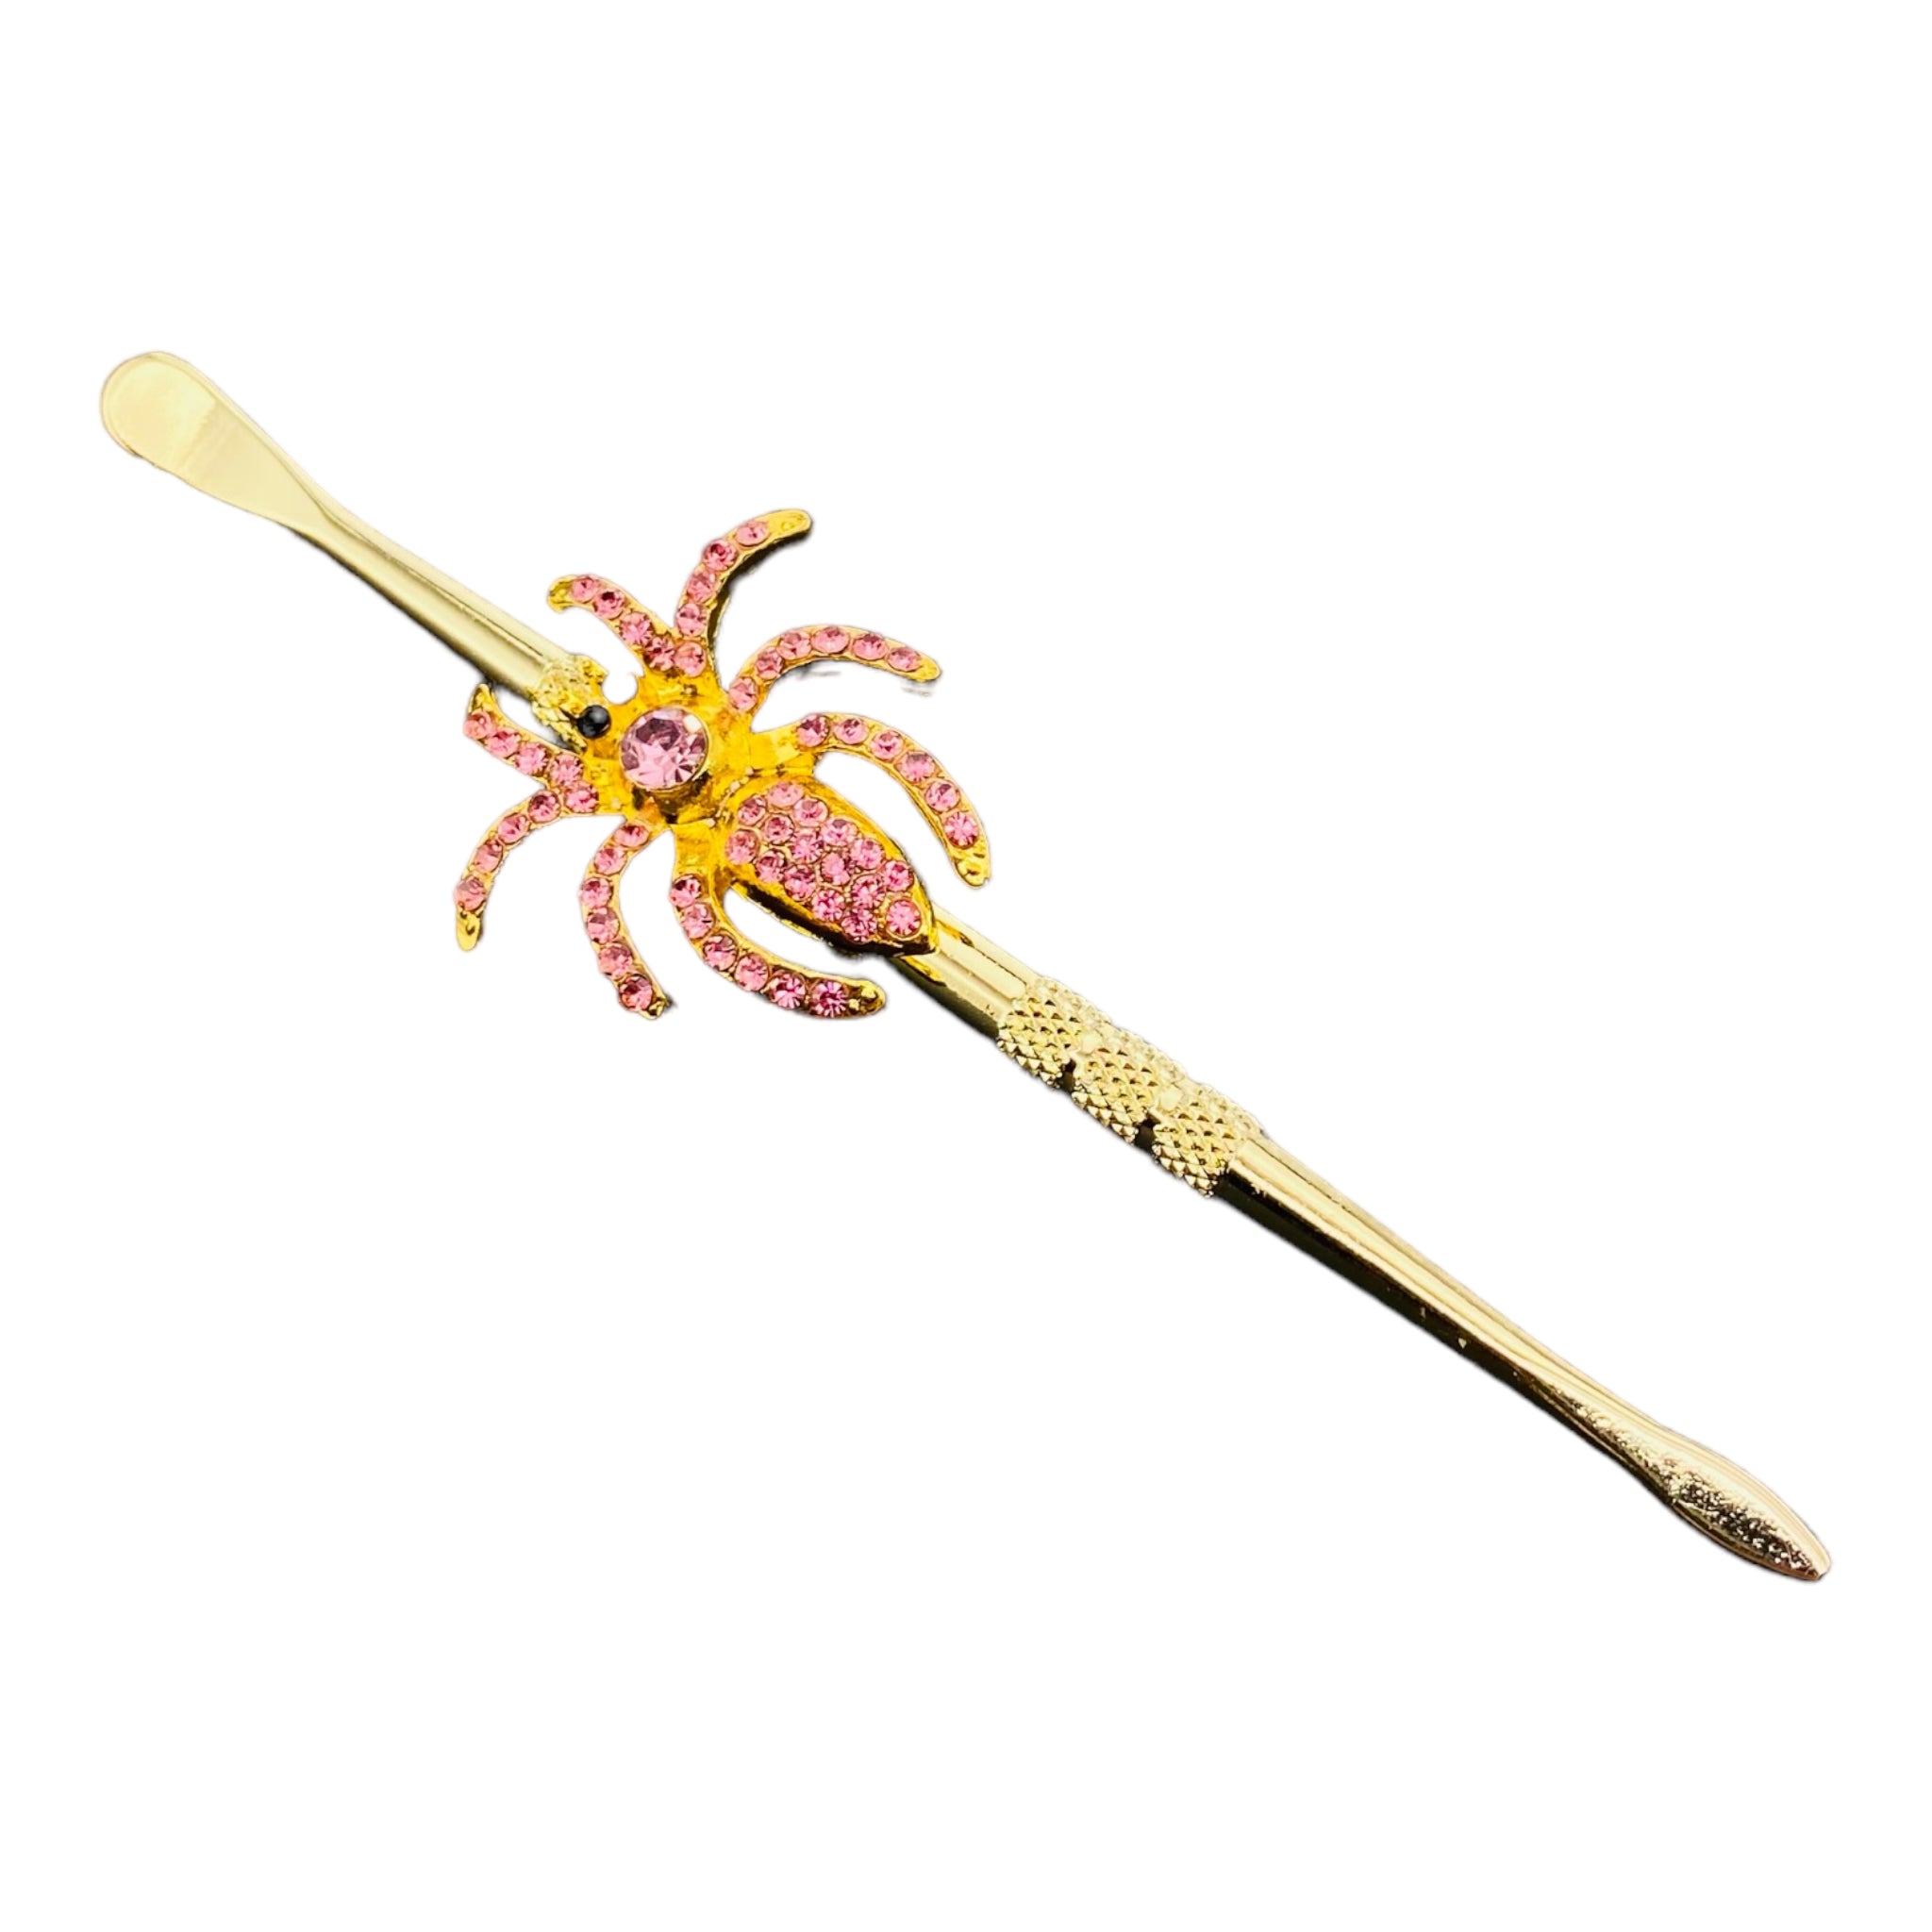 BEEdazzled Gold Paddle Scoop And Spear Point Dab Tool